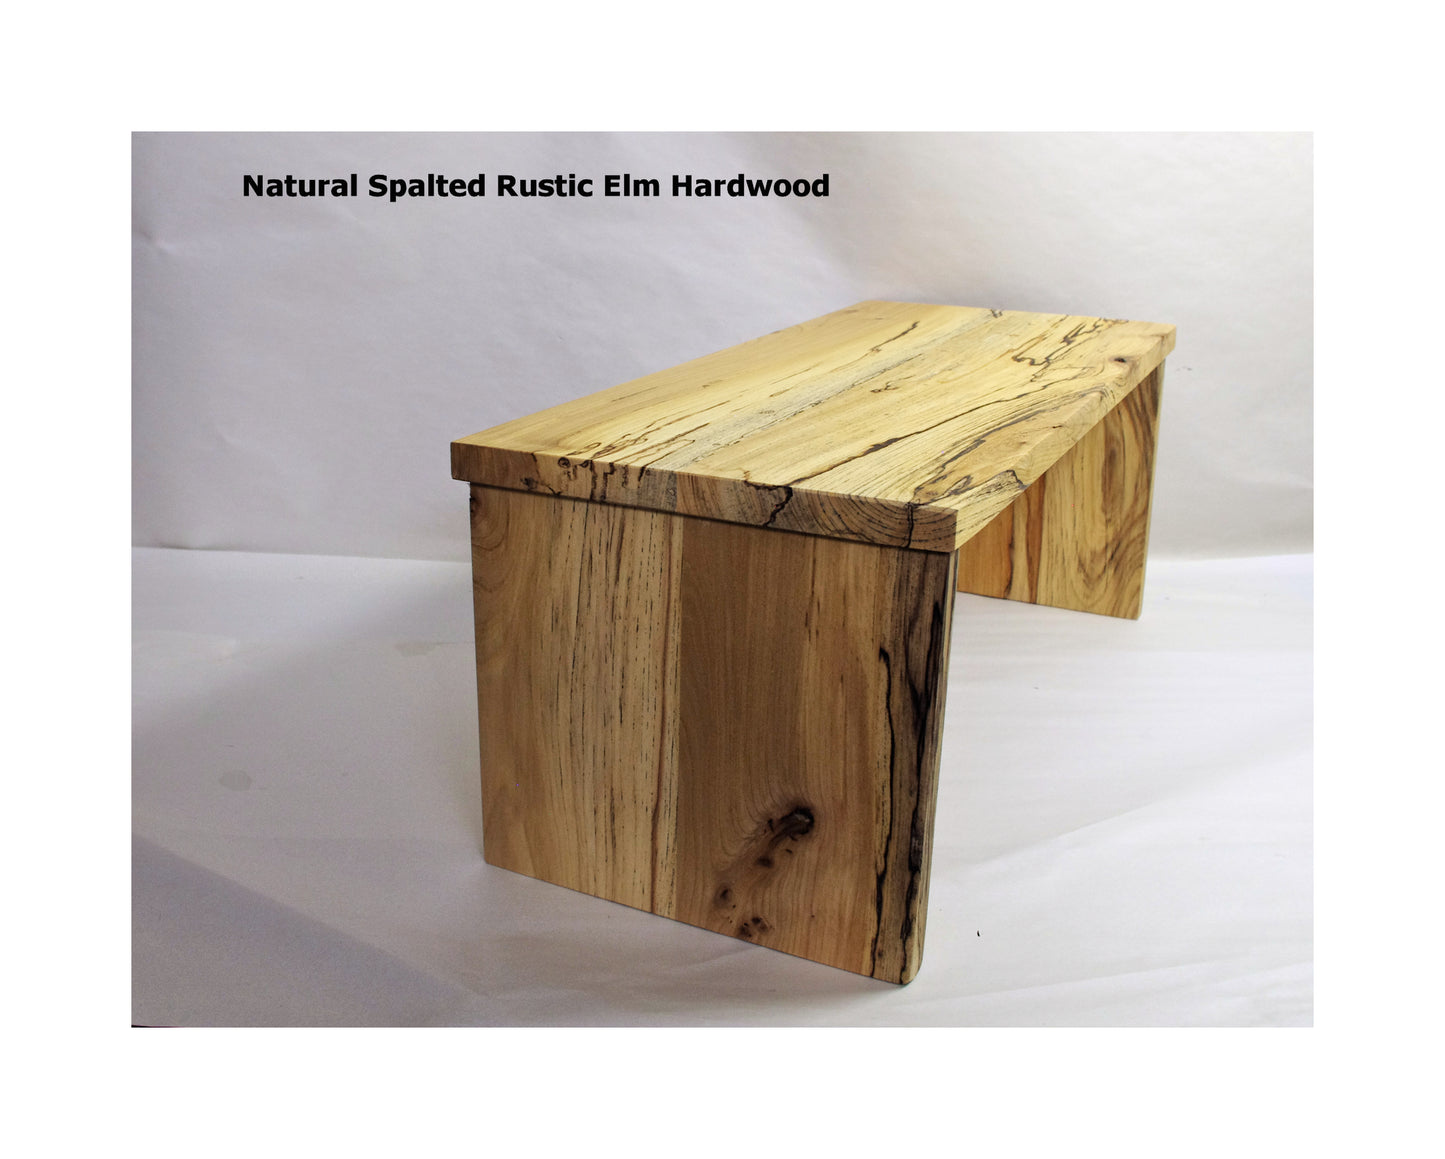 In Stock ON SALE-$89.99 (SAVE $60.00) center channel speaker riser 22L-9.75W-9H Rustic Elm